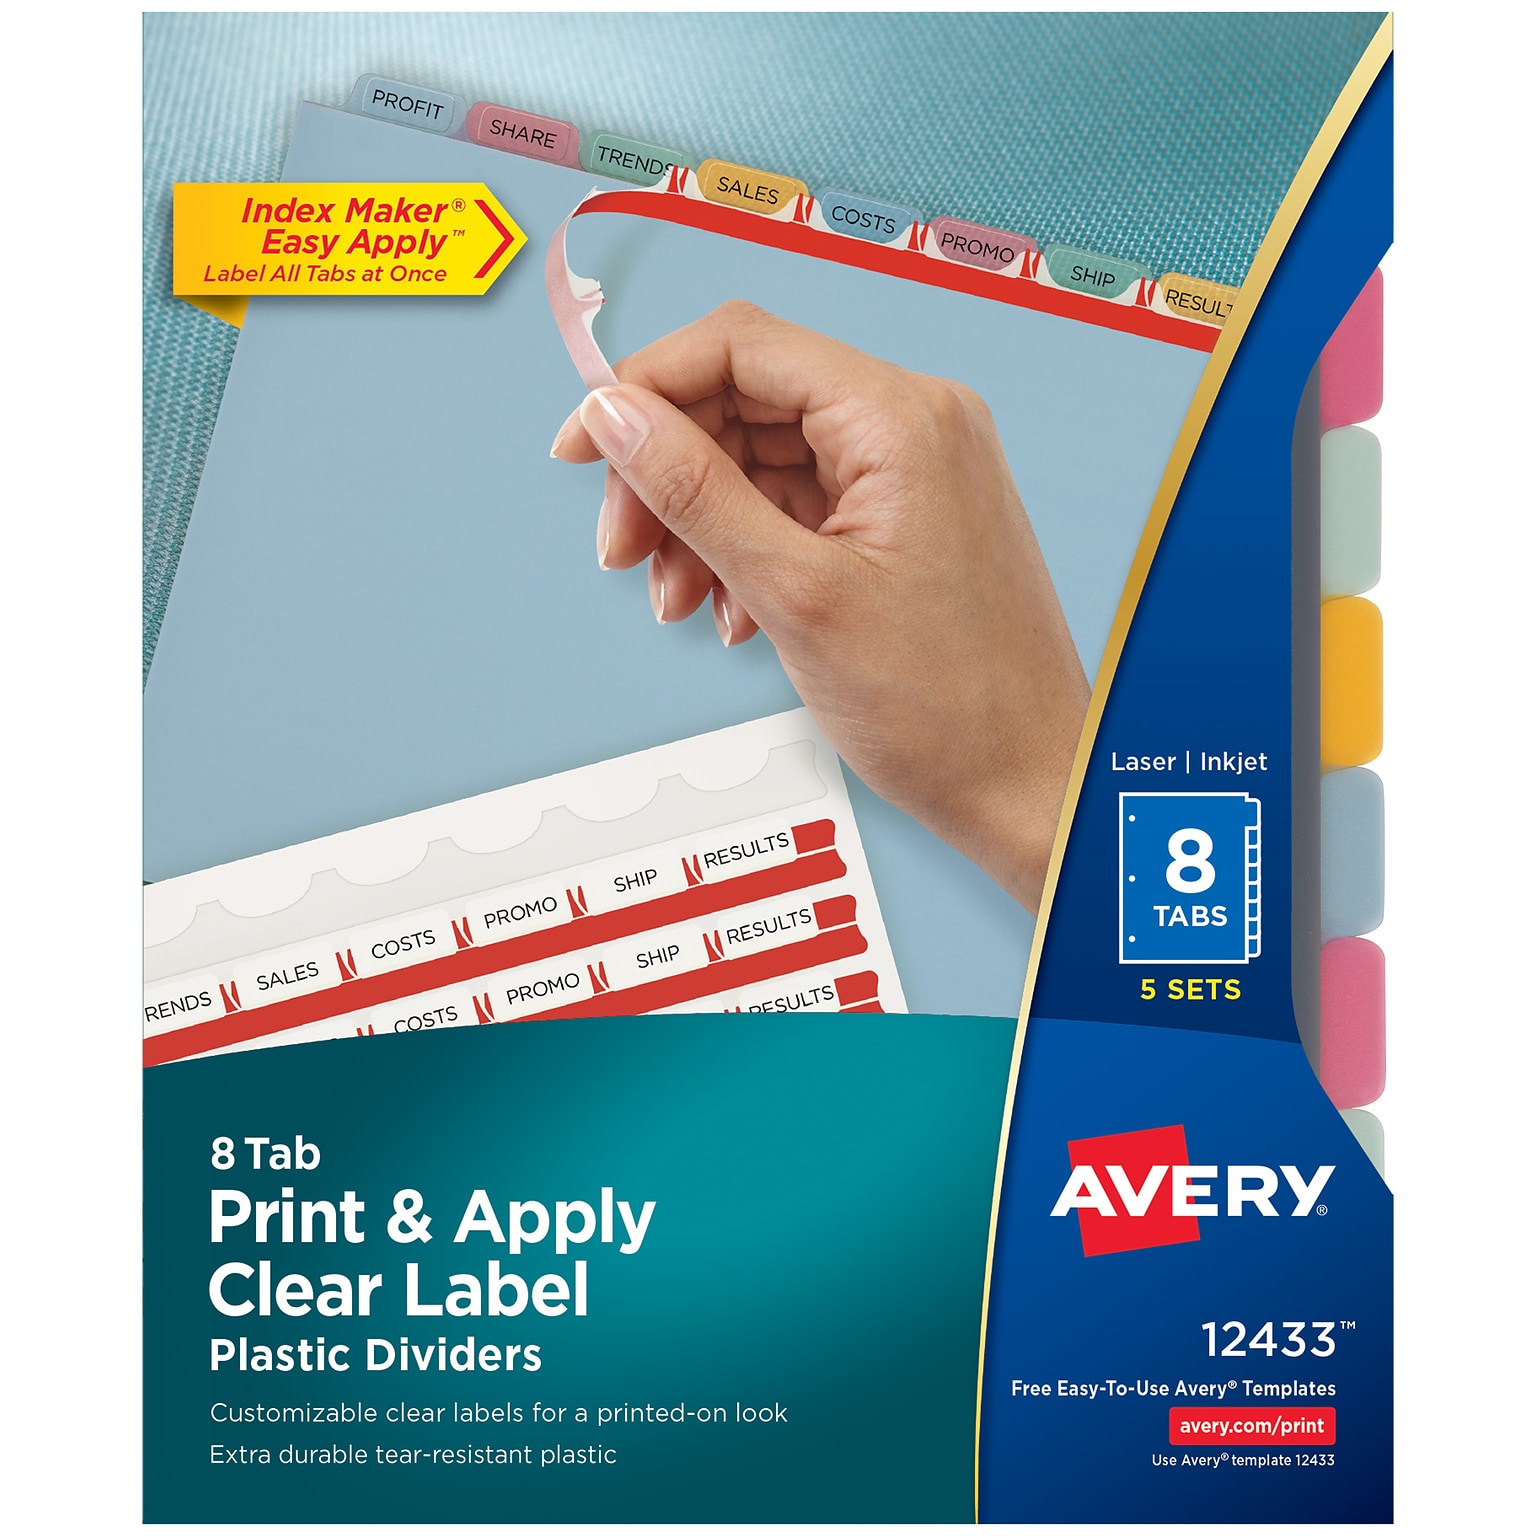 Avery Index Maker Plastic Dividers with Print & Apply Label Sheets, 8 Tabs, Multicolor, 5 Sets/Pack (AVE12433)